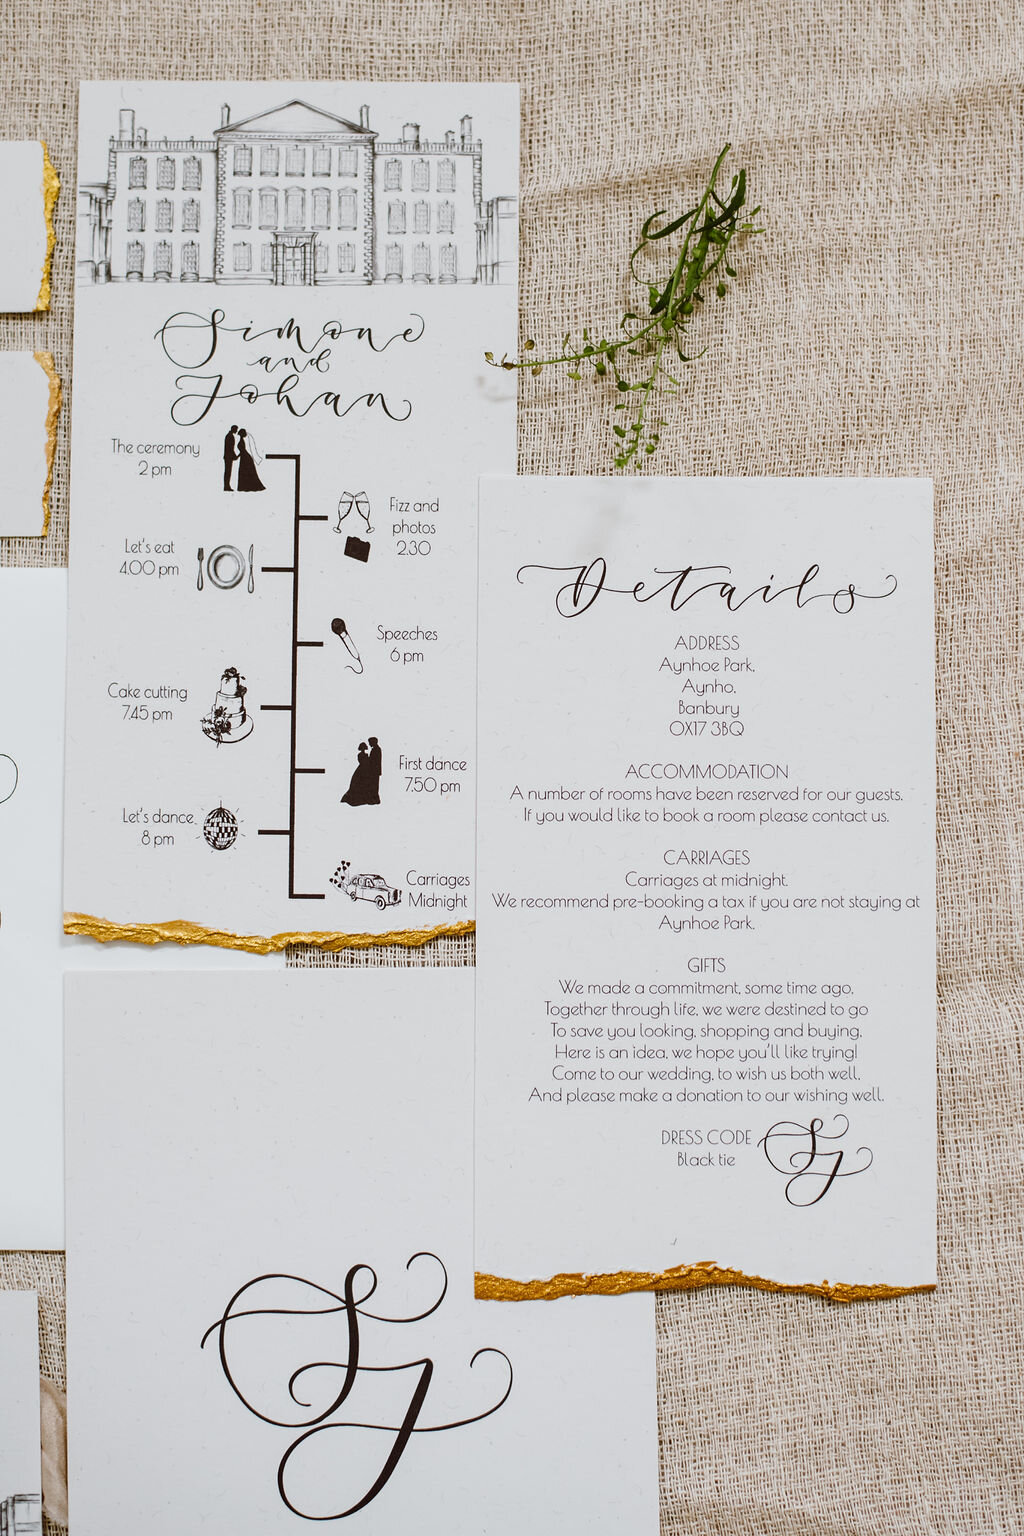 Monochrome Aynhoe Park invitation suite printed on recycled paper with gold details by The Amyverse with illustrated timeline and venue sketch.jpg